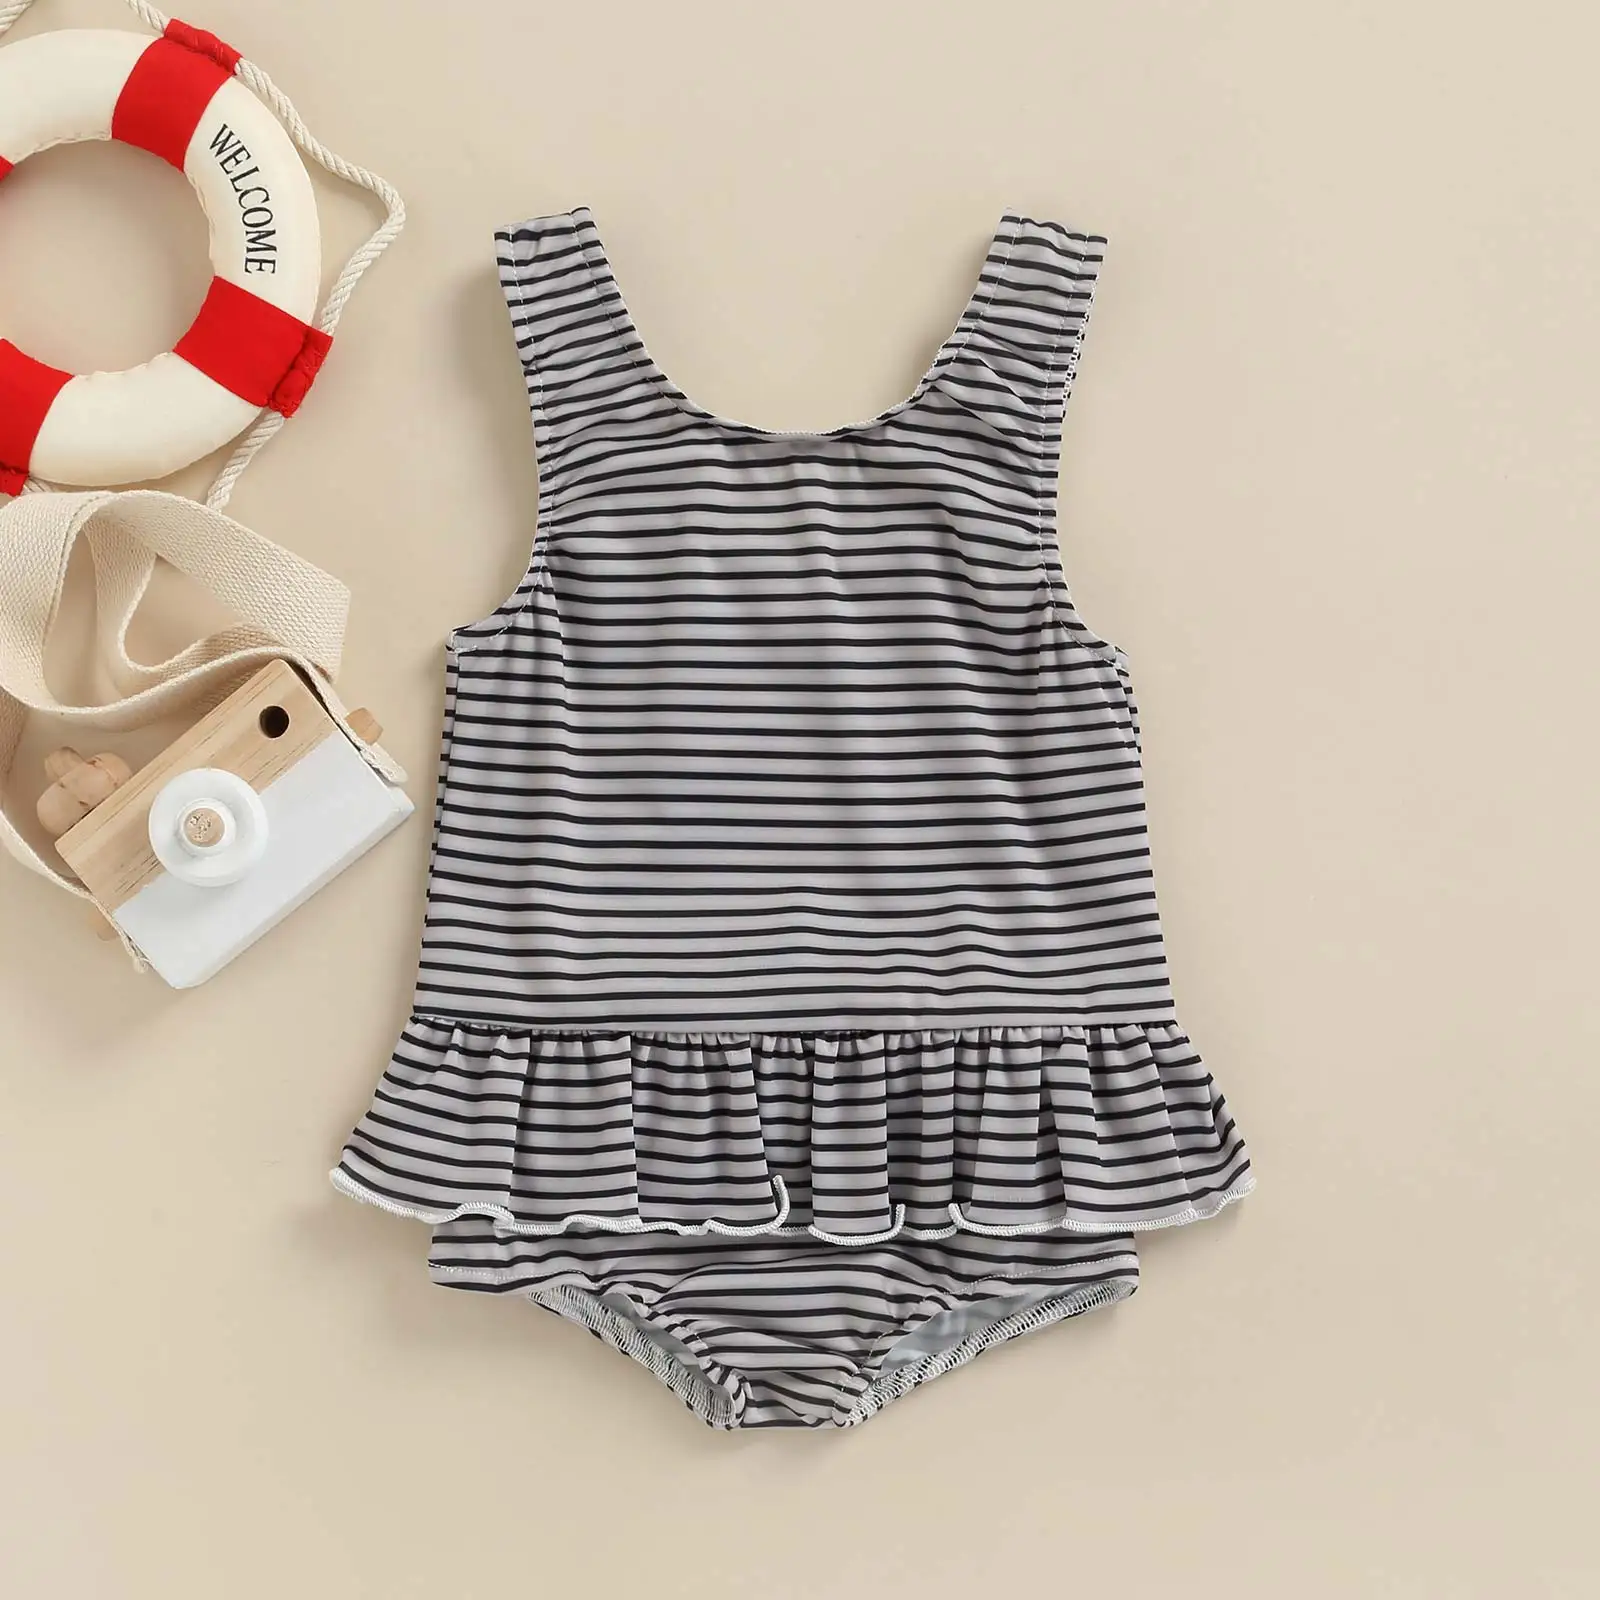 Infant Baby Girl Ruffled Swimwear, Bathing Sui Infant Stripe / Solid Color / Print Sleeveless Round Neck Bathing Suit 6M-3T Baby Bodysuits expensive